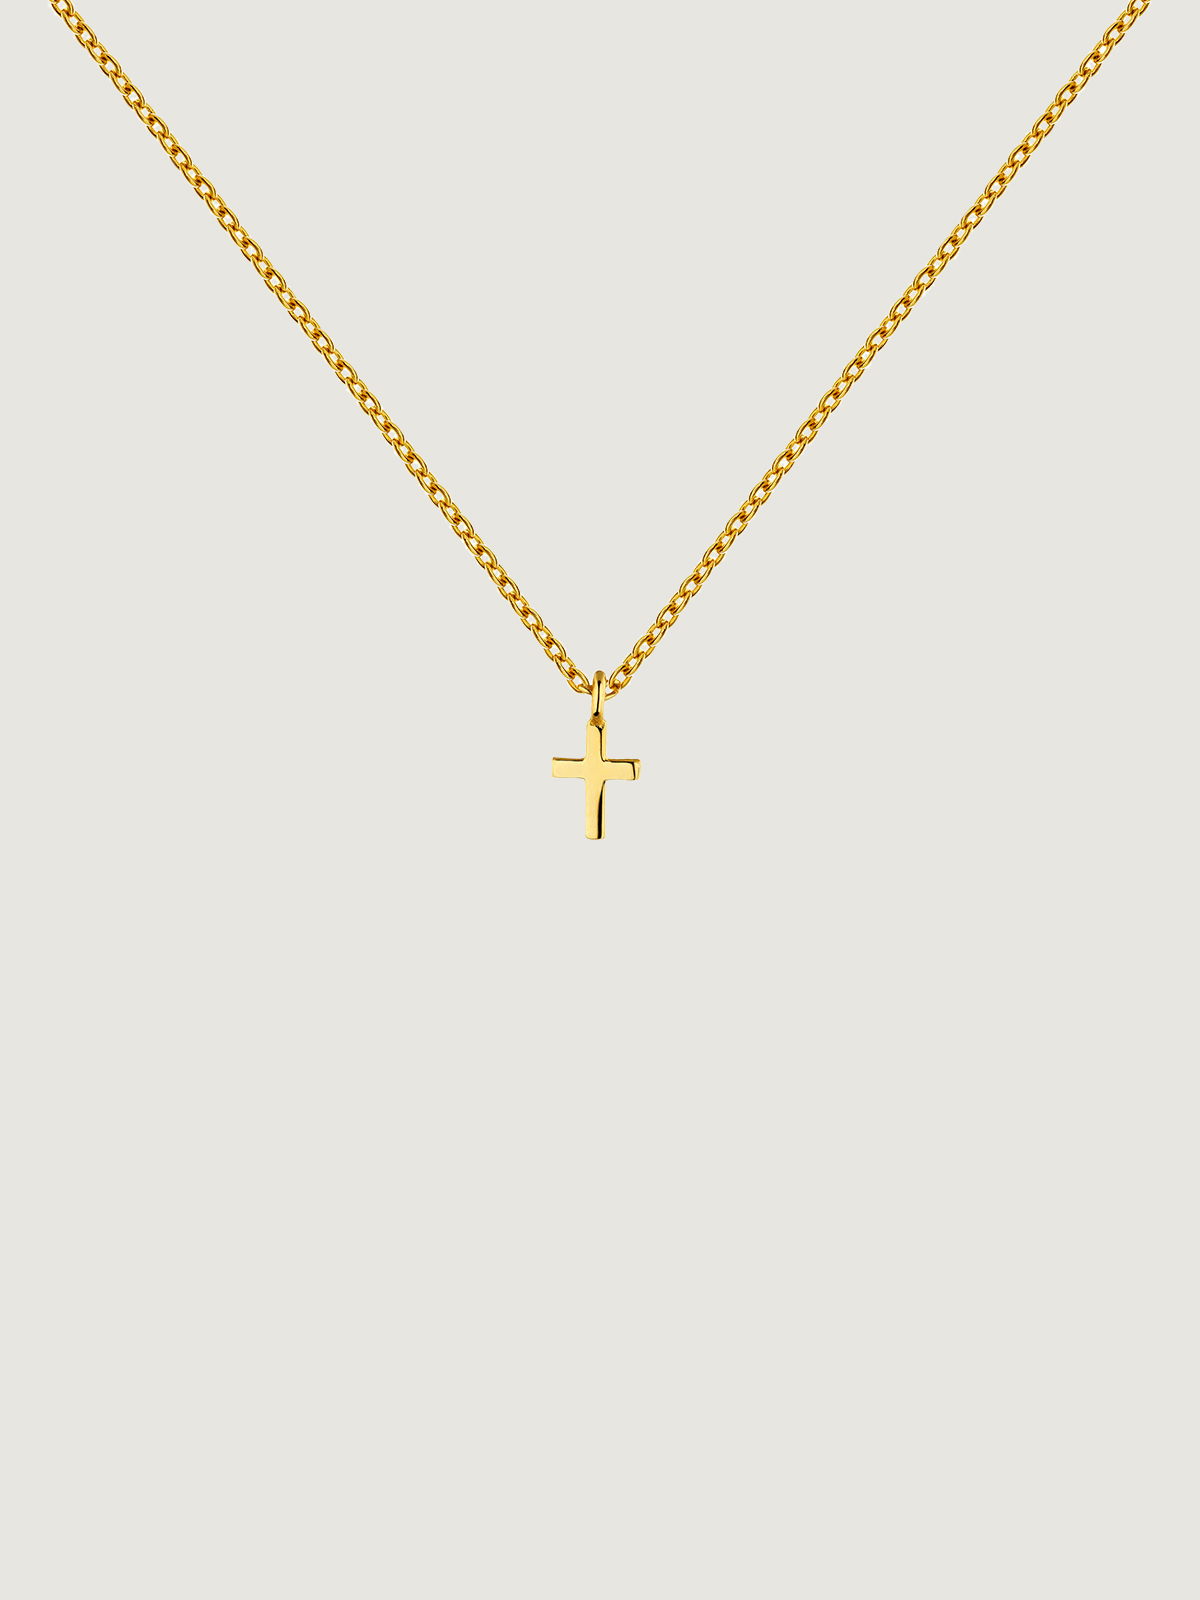 925 silver pendant, dipped in 18K yellow gold with a cross.